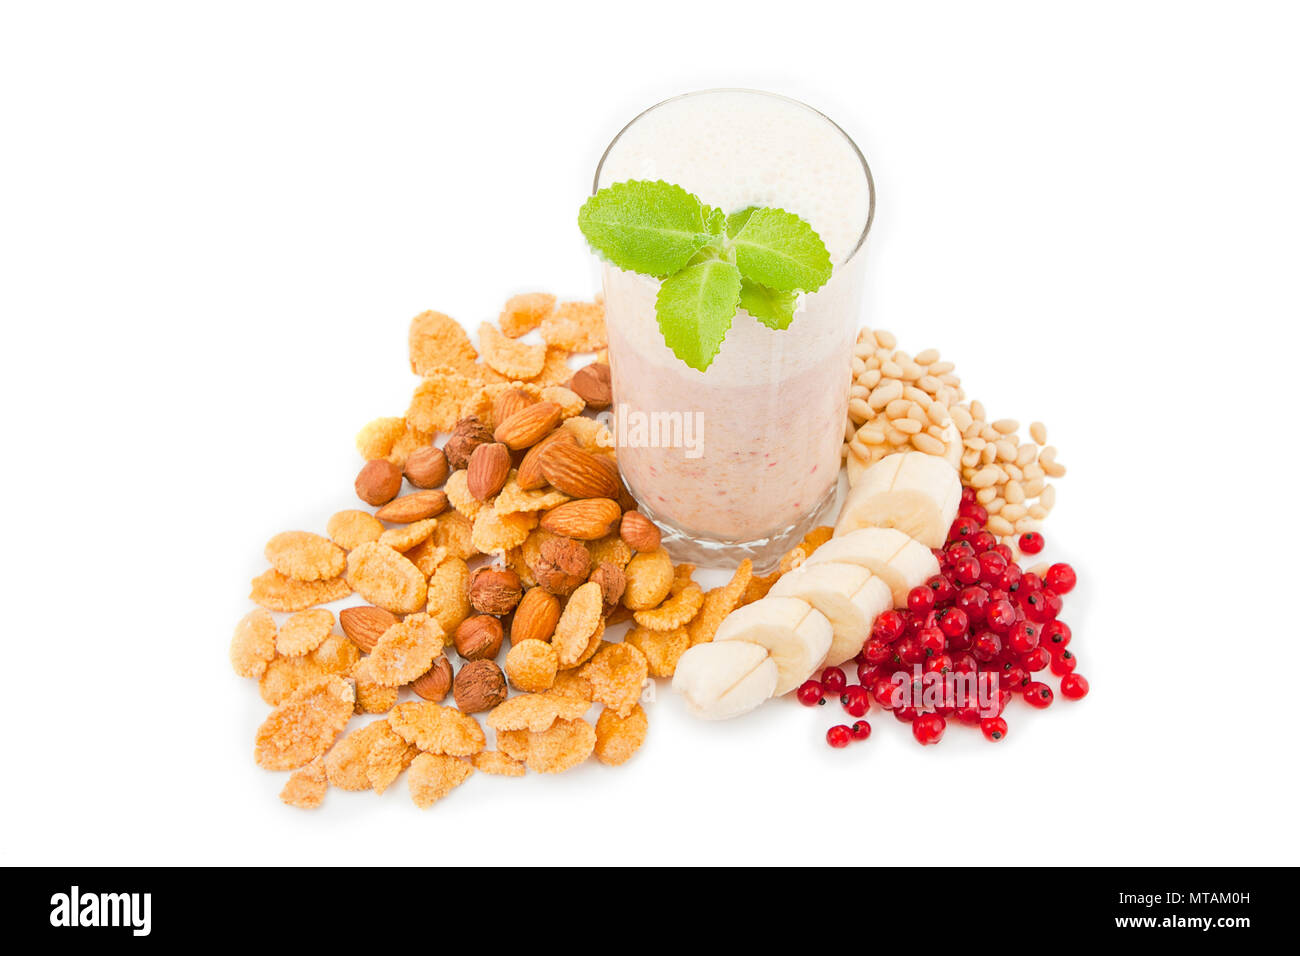 berry breakfast, morning smoothies, wholesome food, mix of yogurt and berries, power Breakfast, healthy food, Stock Photo